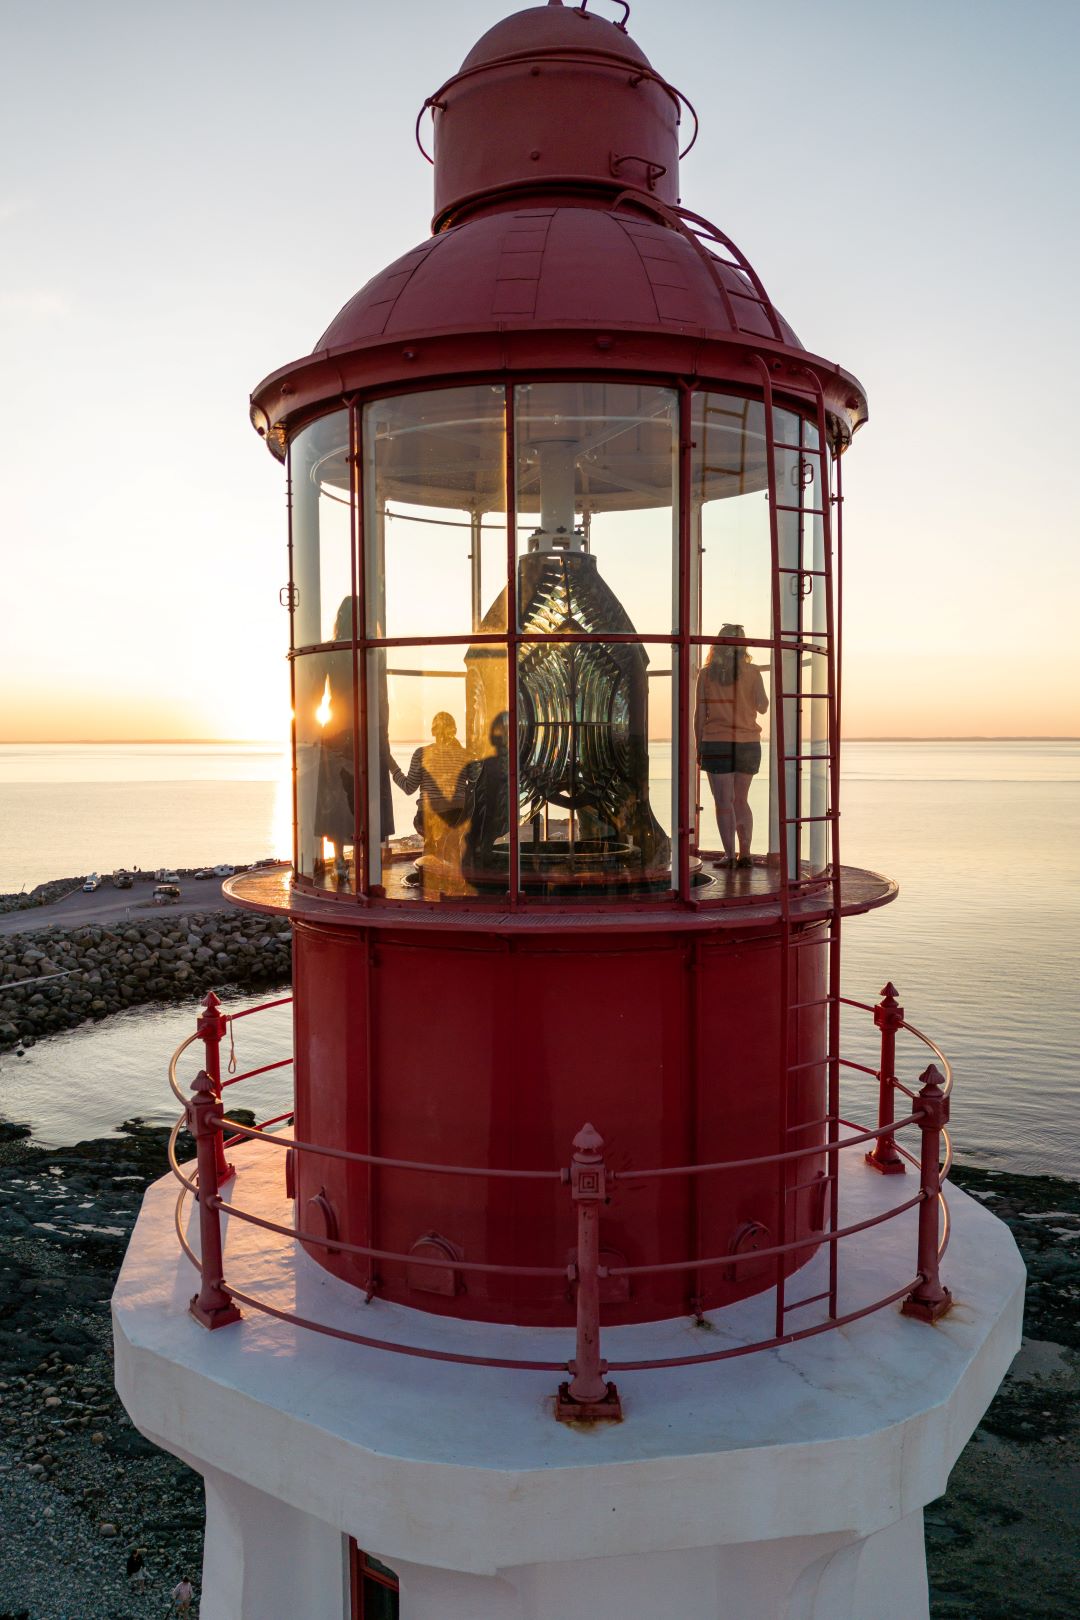 A family watches the sunset from the dome of a lighthouse.